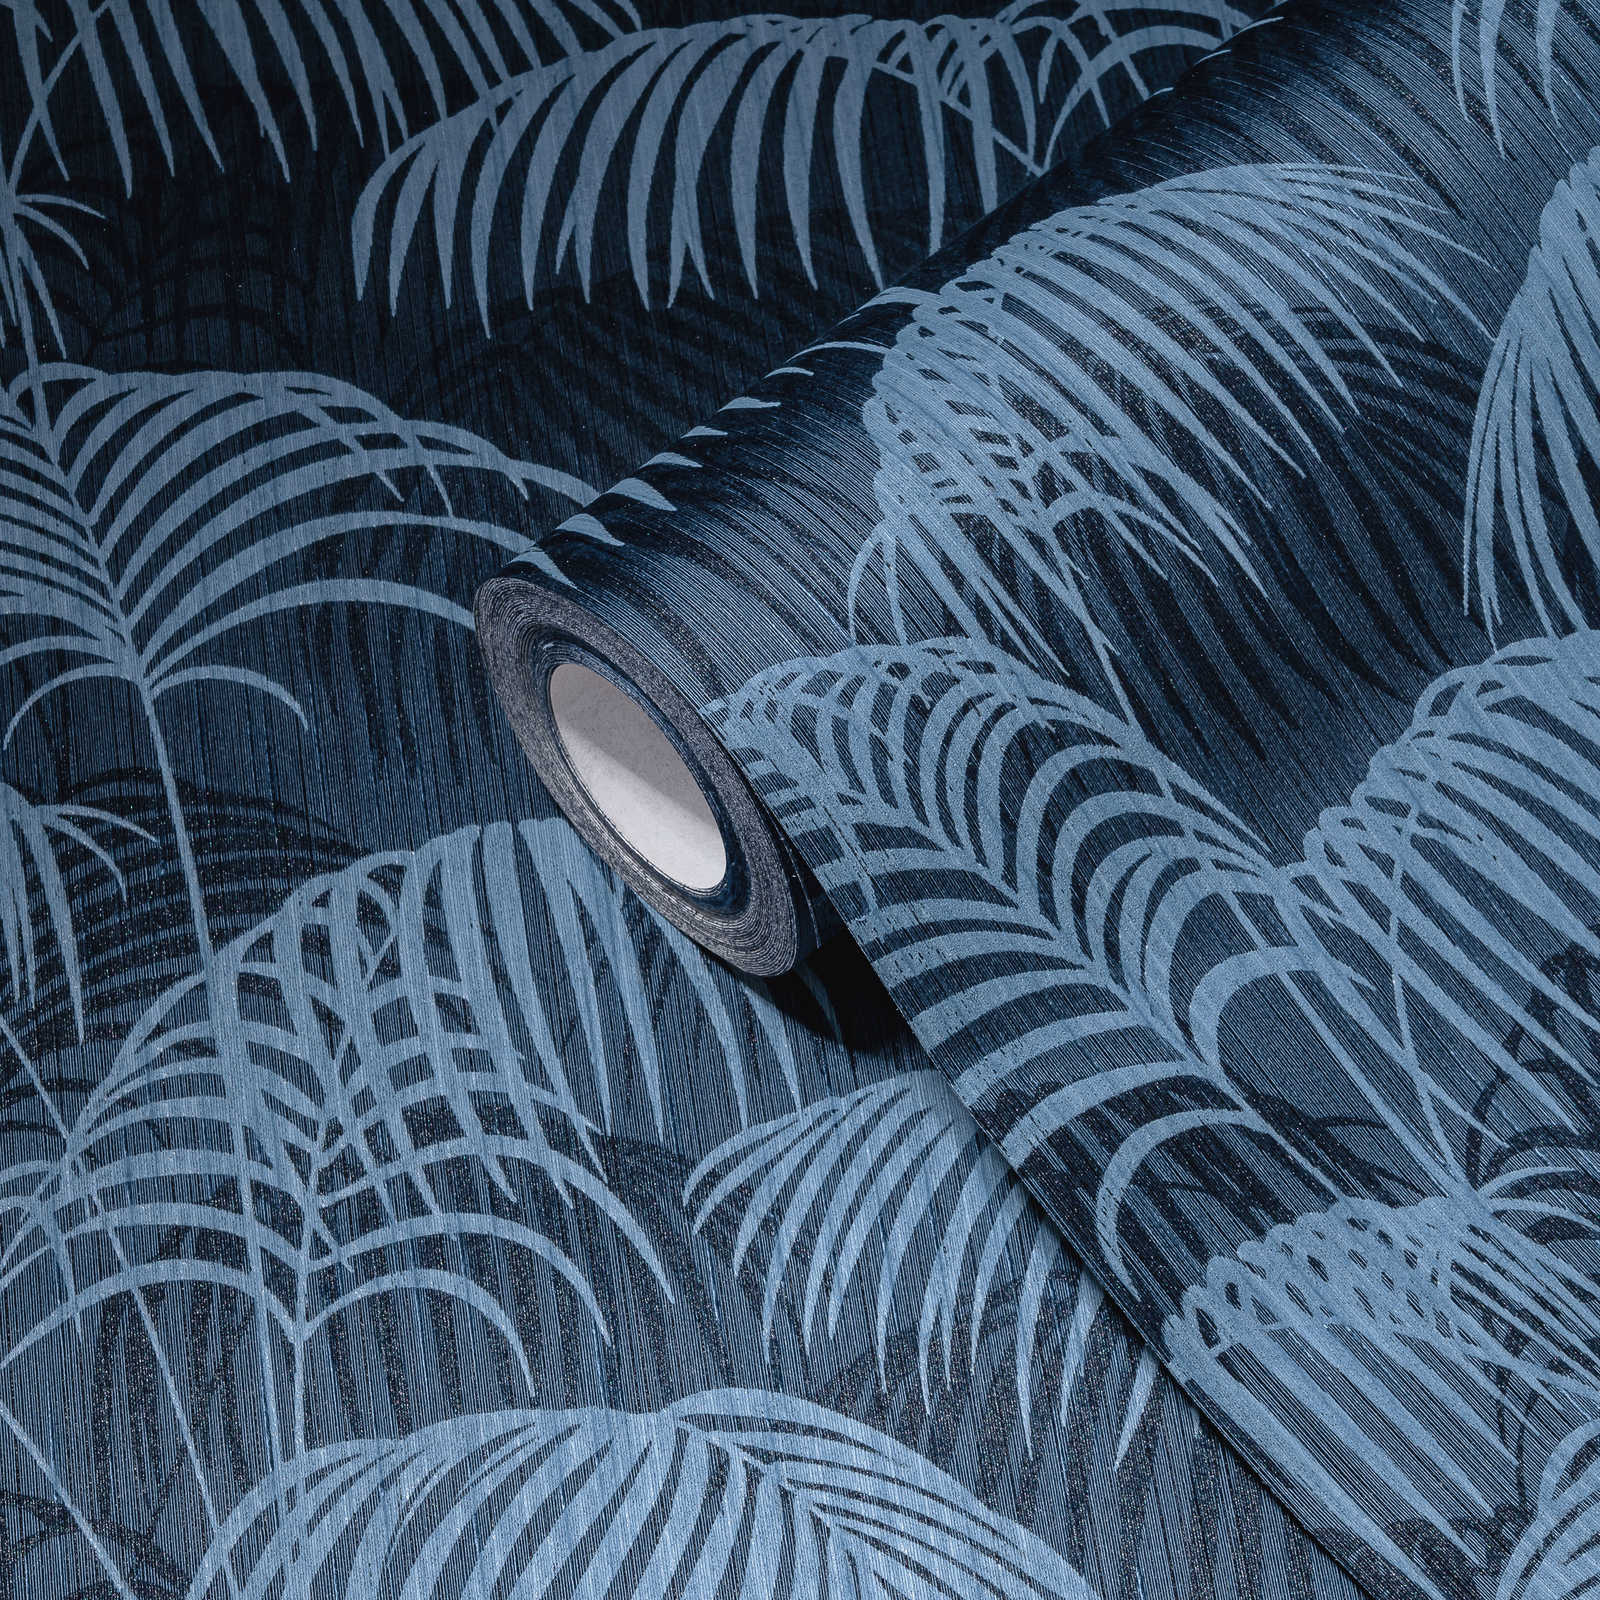             Wallpaper jungle leaves pattern colonial style - blue
        